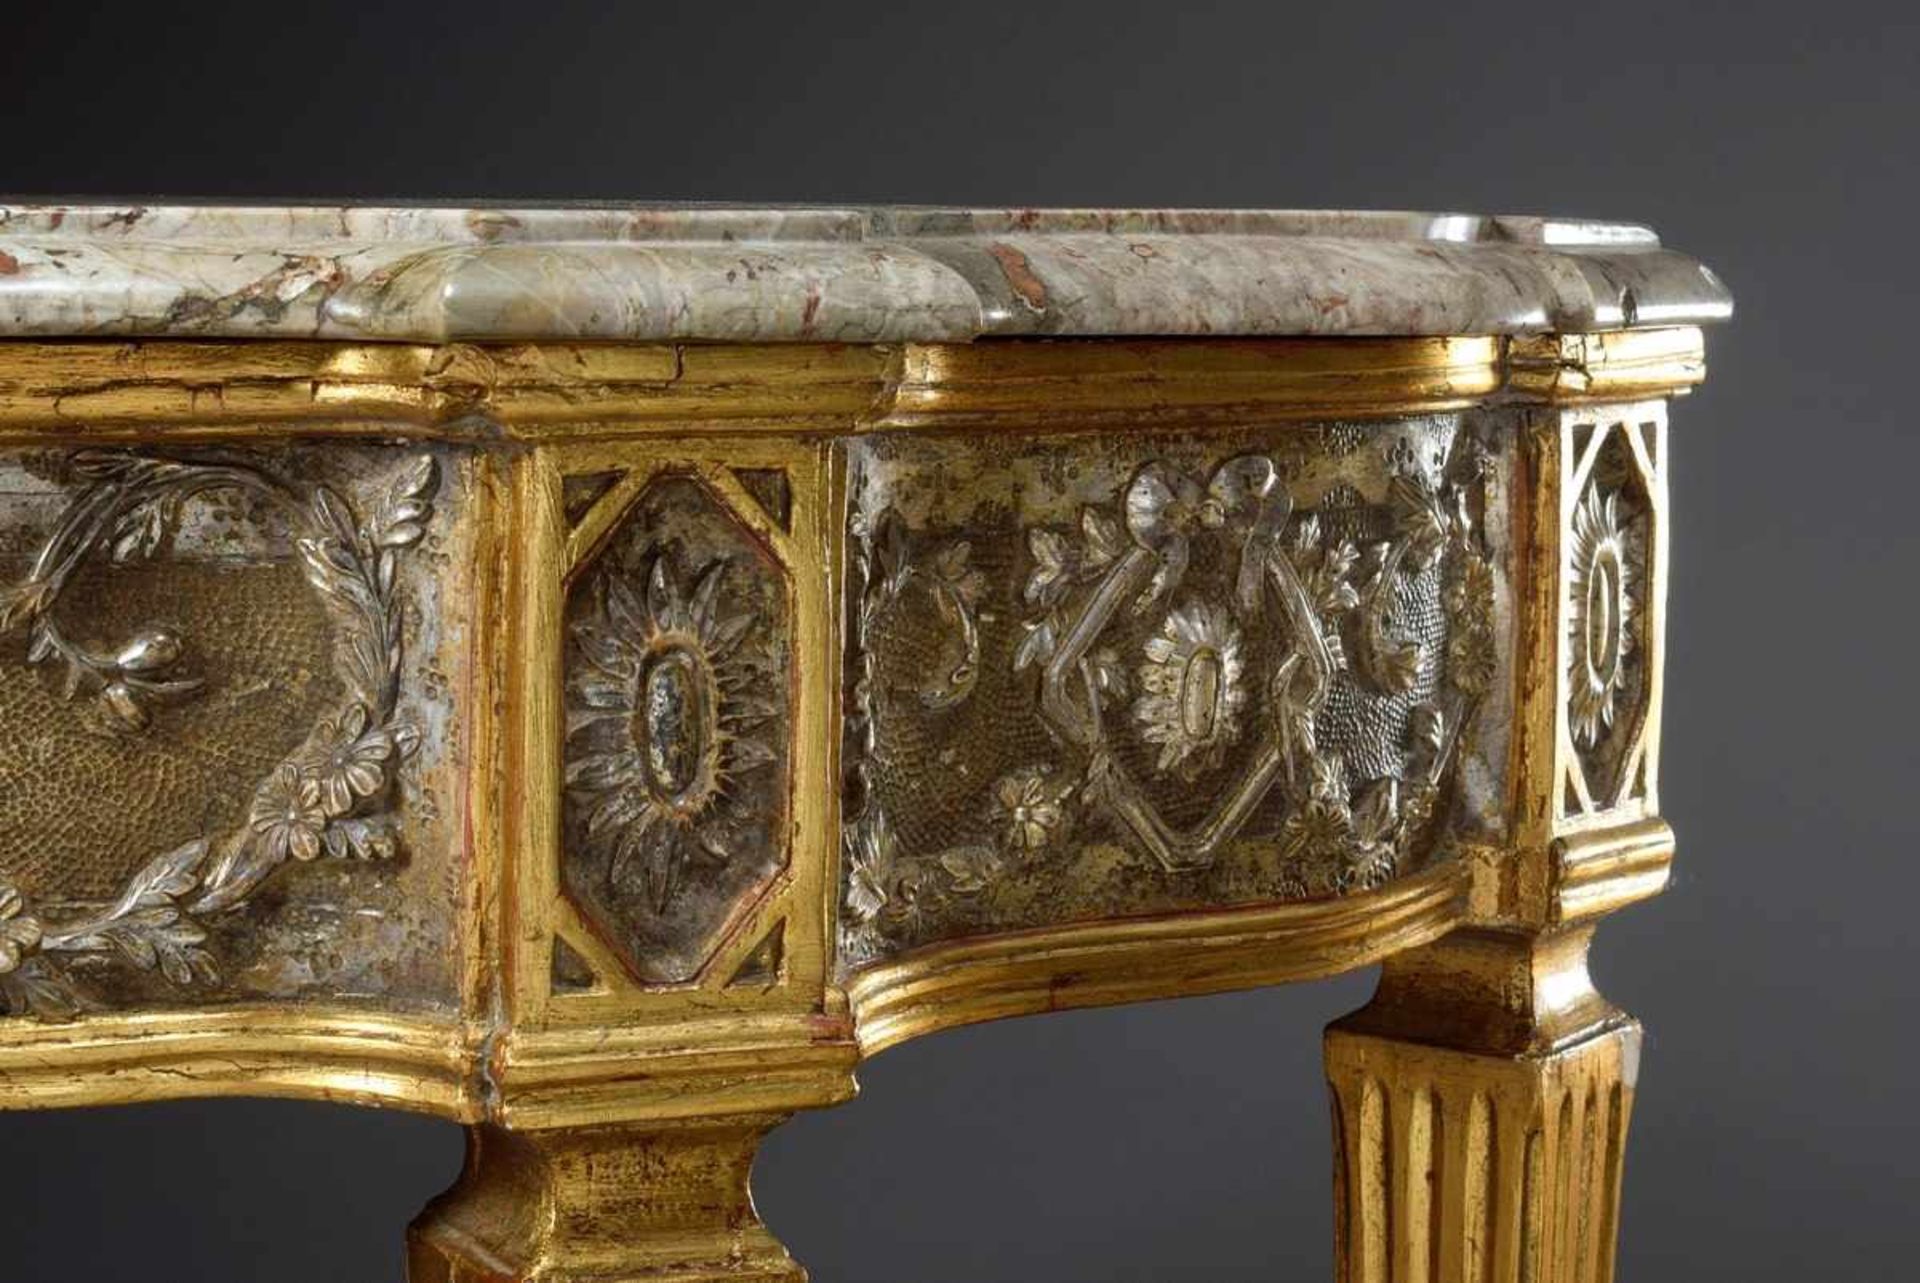 Courtly Louis XVI console on pointed legs with floral and ornamental relief carving "Birds" in the - Image 5 of 6